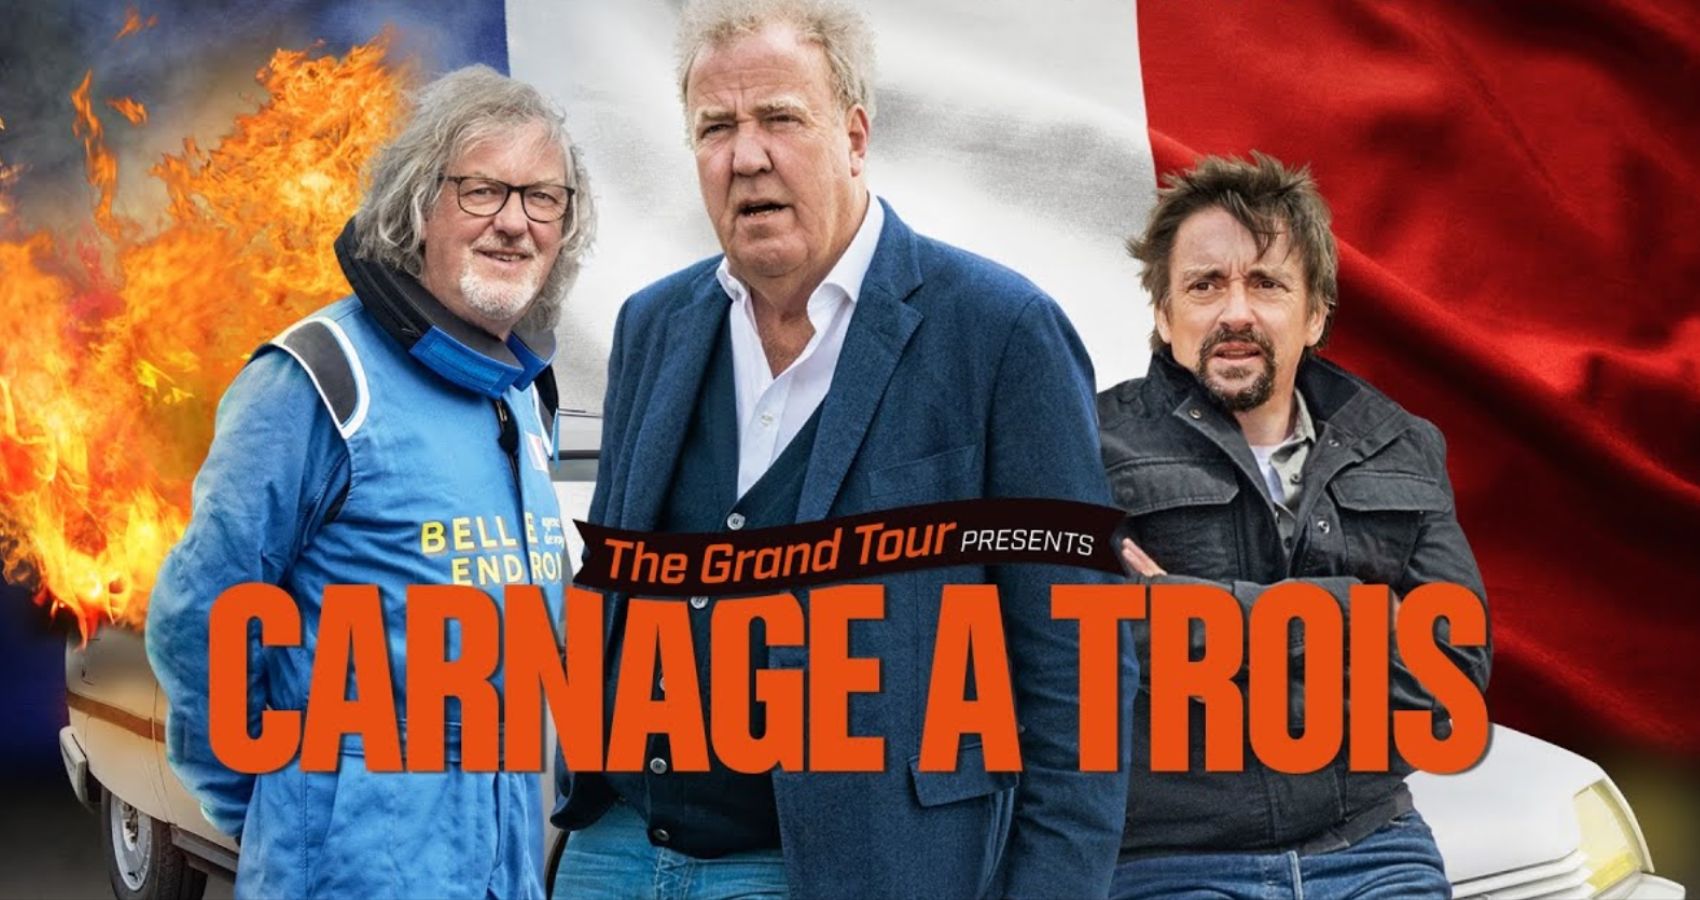 The Grand Tour Carnage A Trois Trailer Featured Image